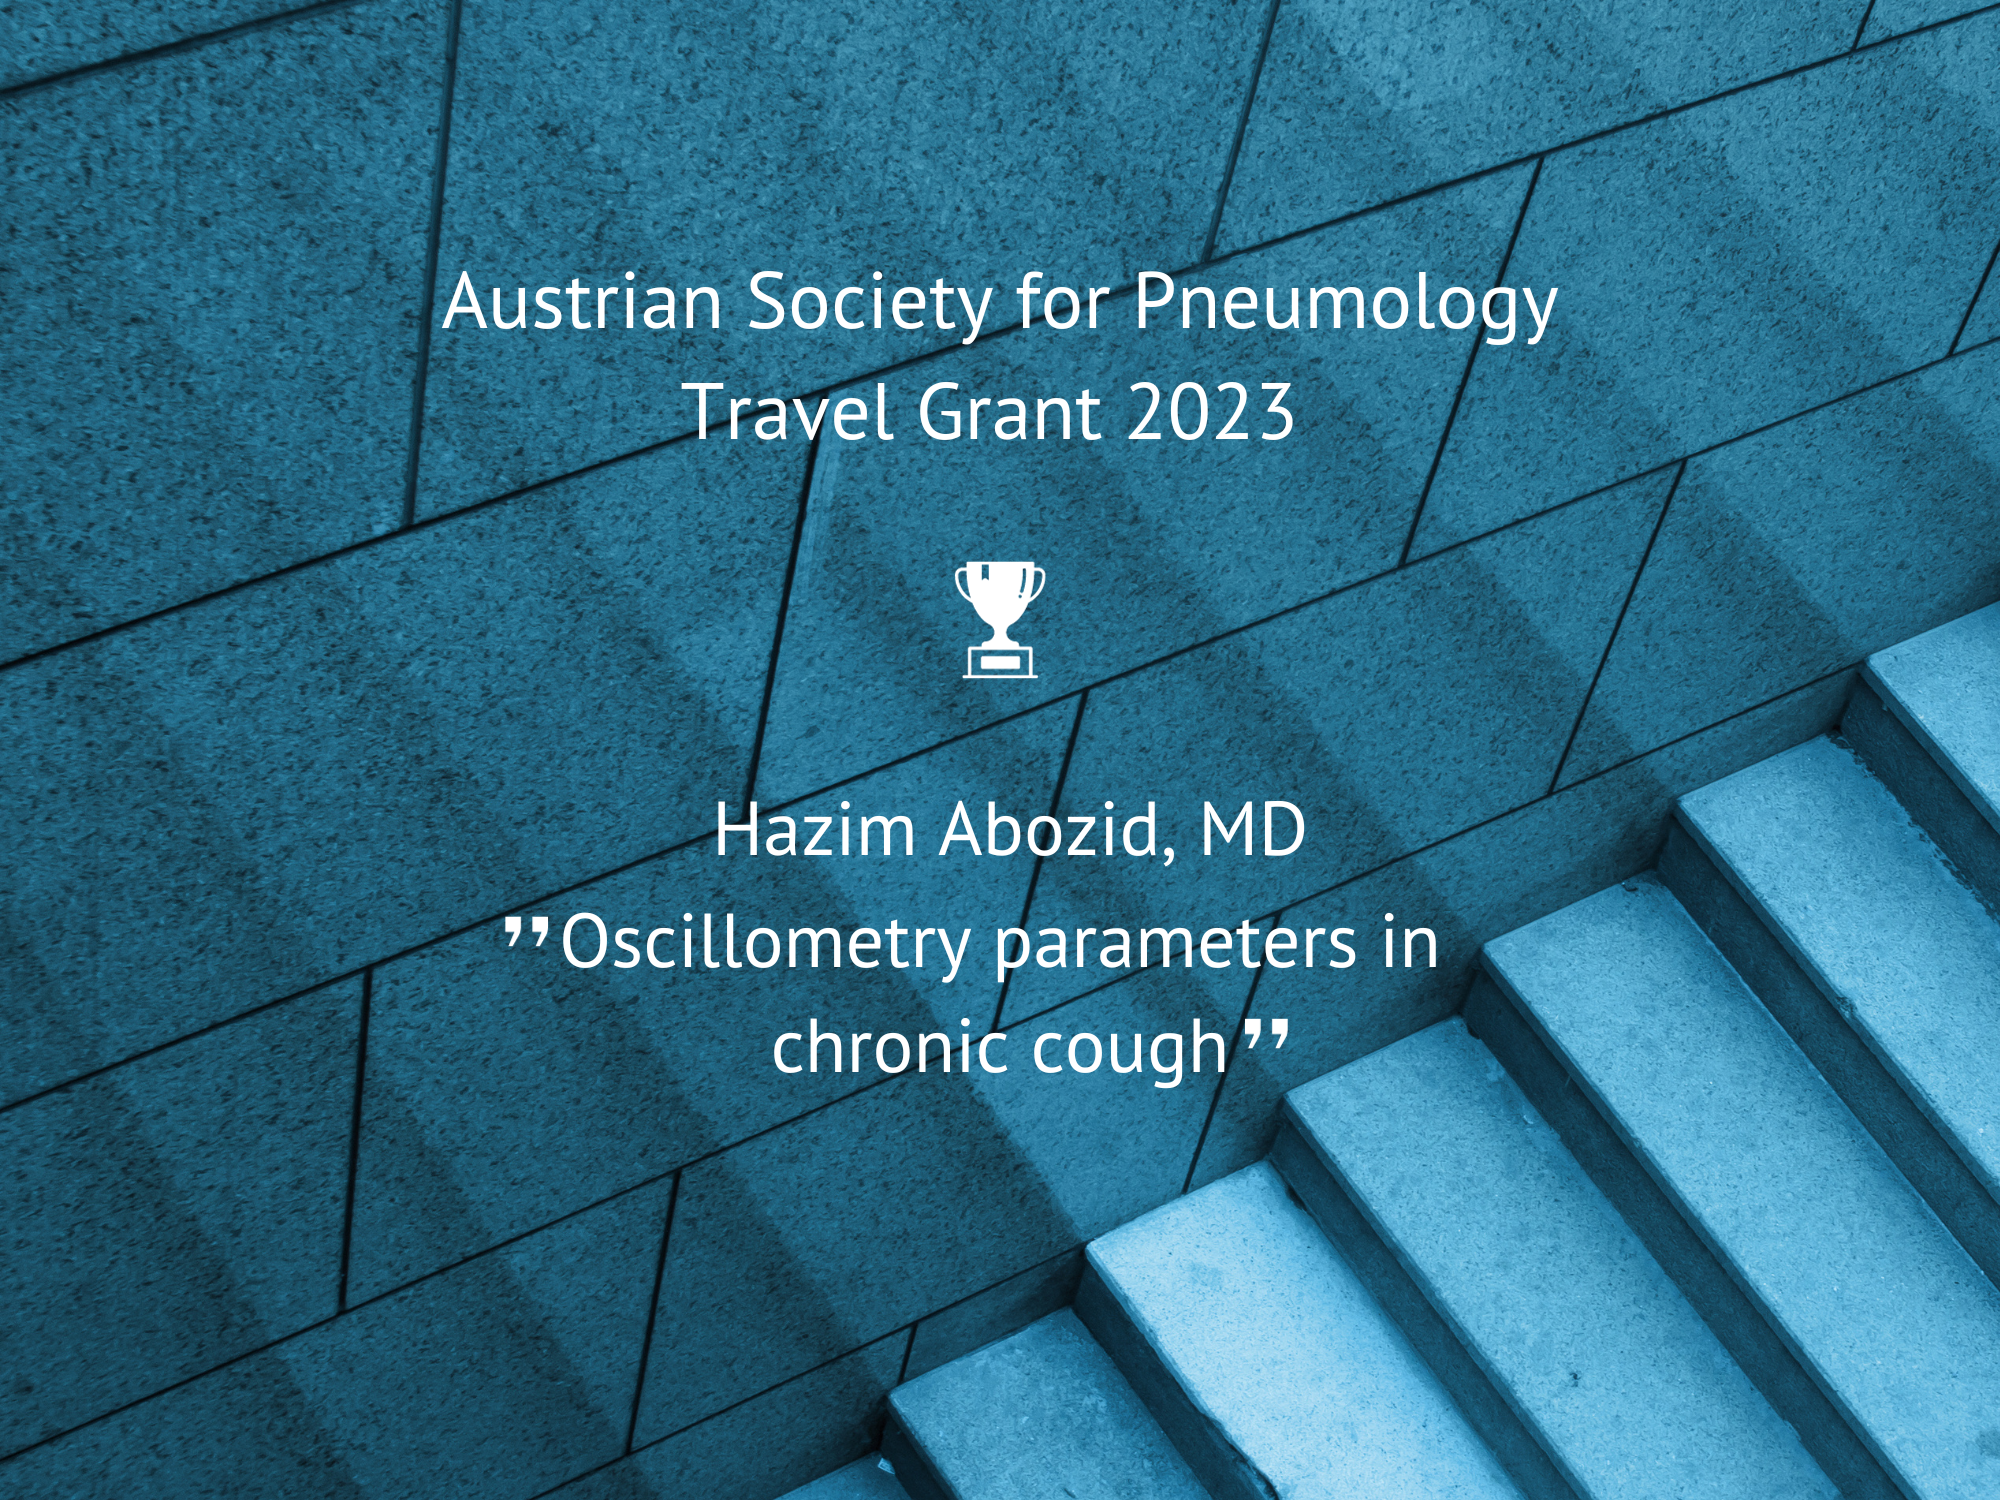 ERS Travel Grant 2023 from the Austrian Society for Pneumology